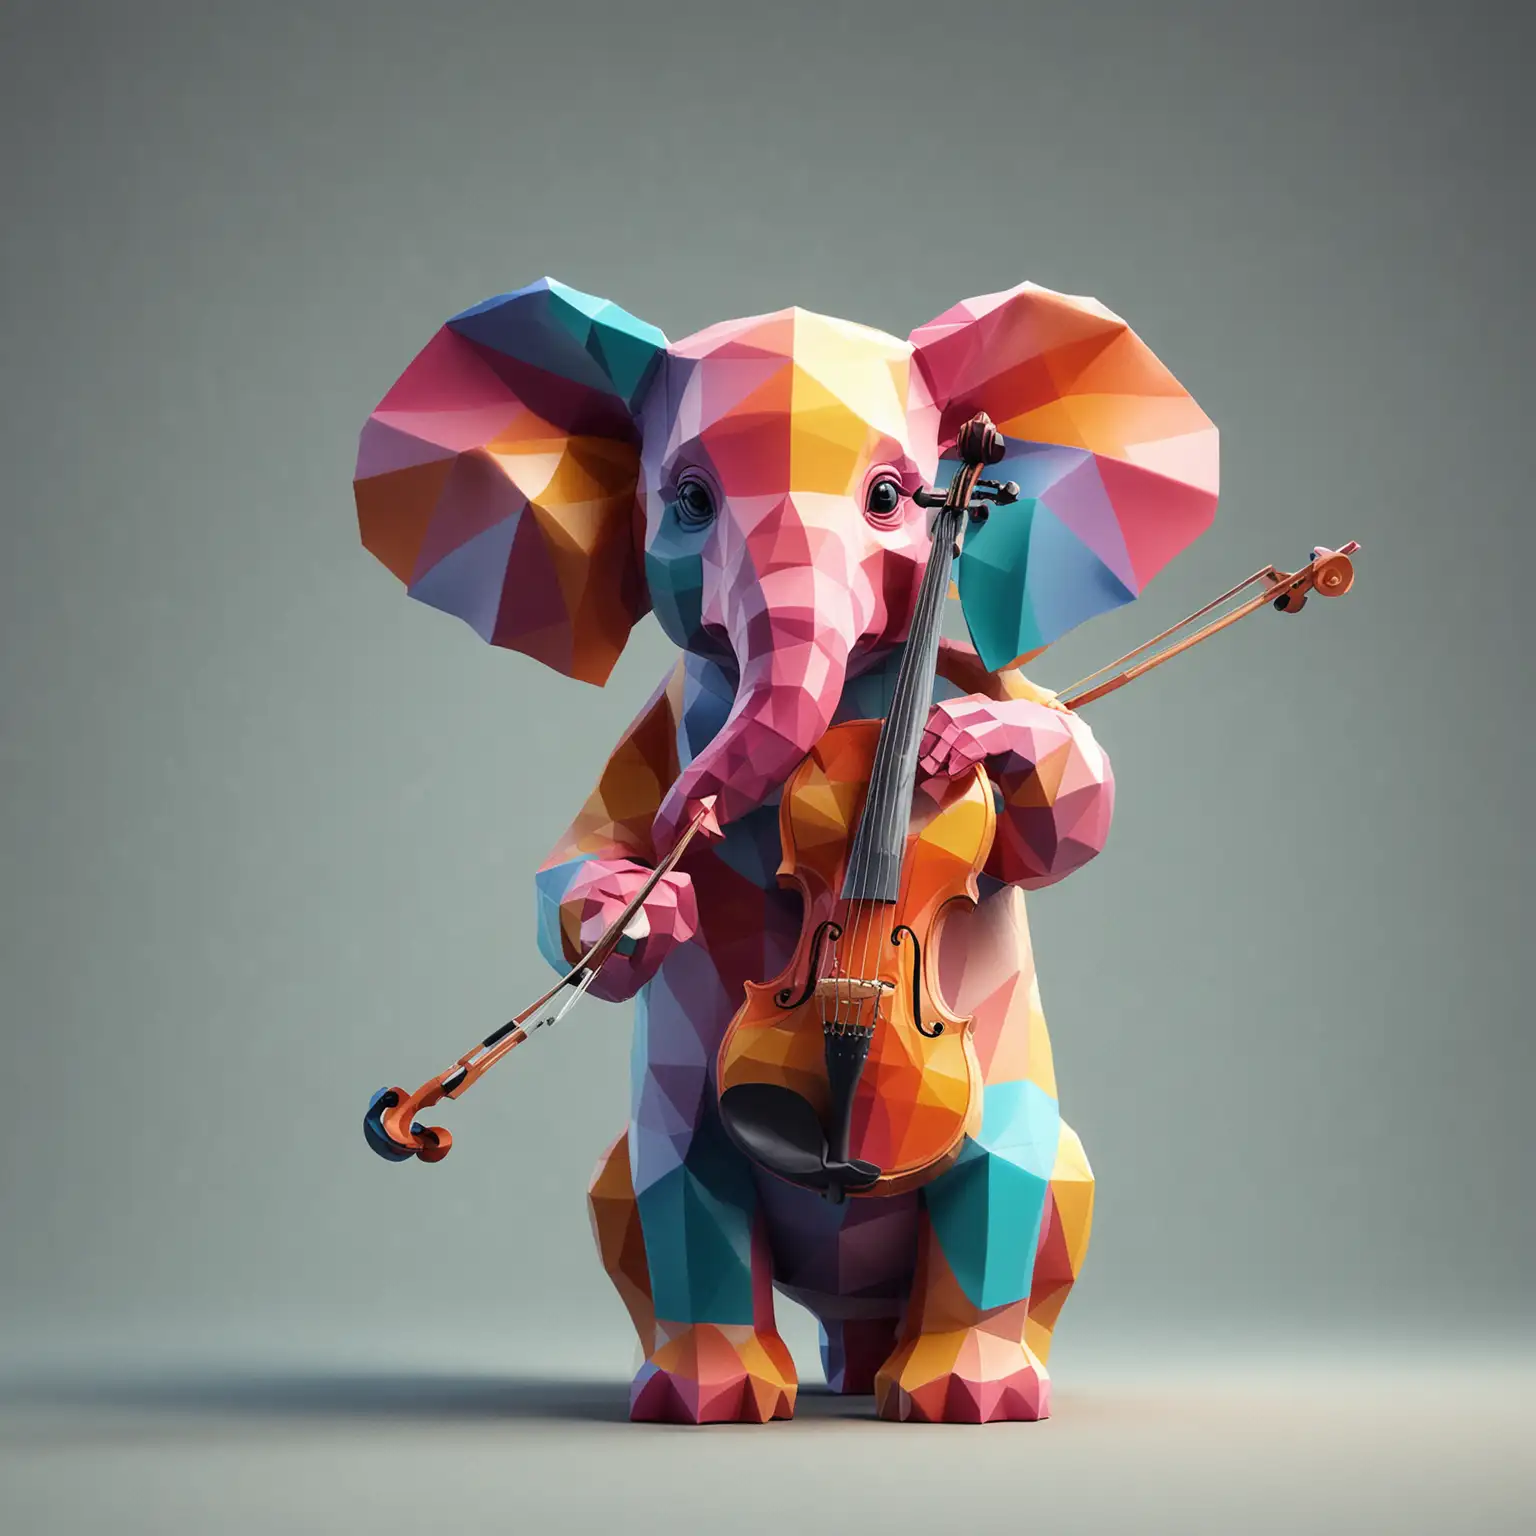 Multicolored Elephant Playing Violin with 3D Geometric Shapes